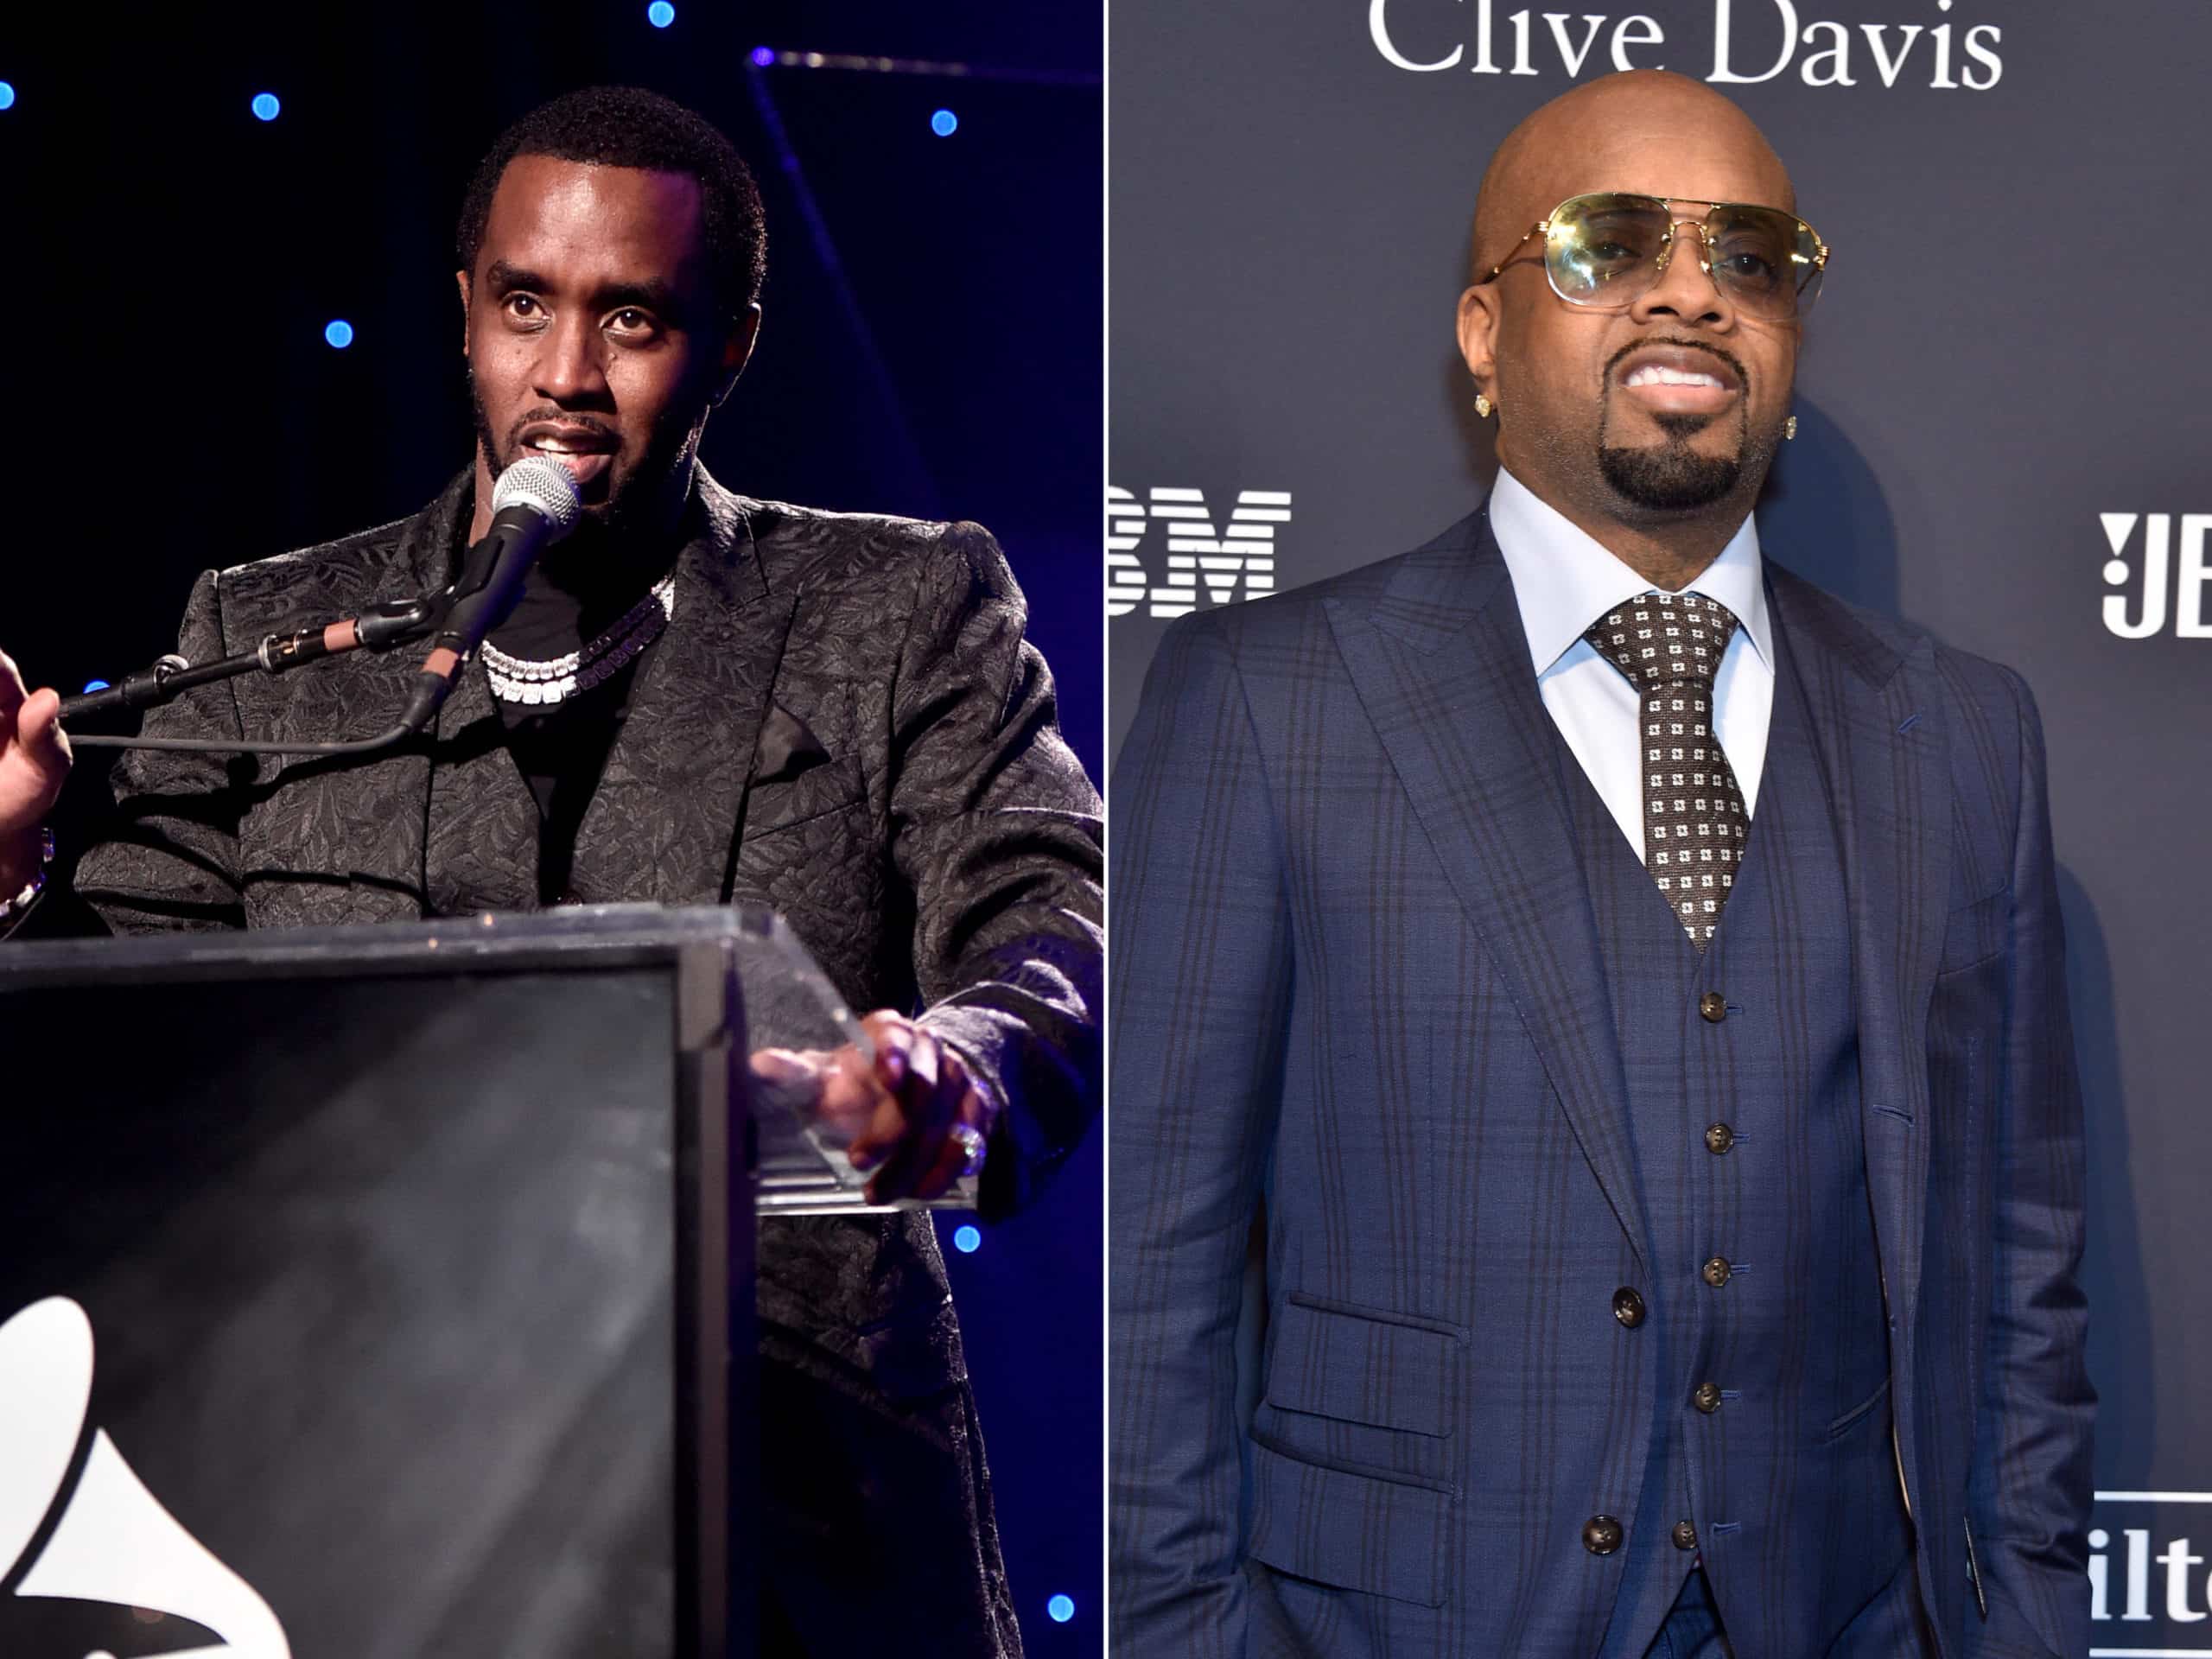 Diddy and Jermaine Dupri debate on Instagram Live who would win in a battle if they were to face off hit-for-hit.